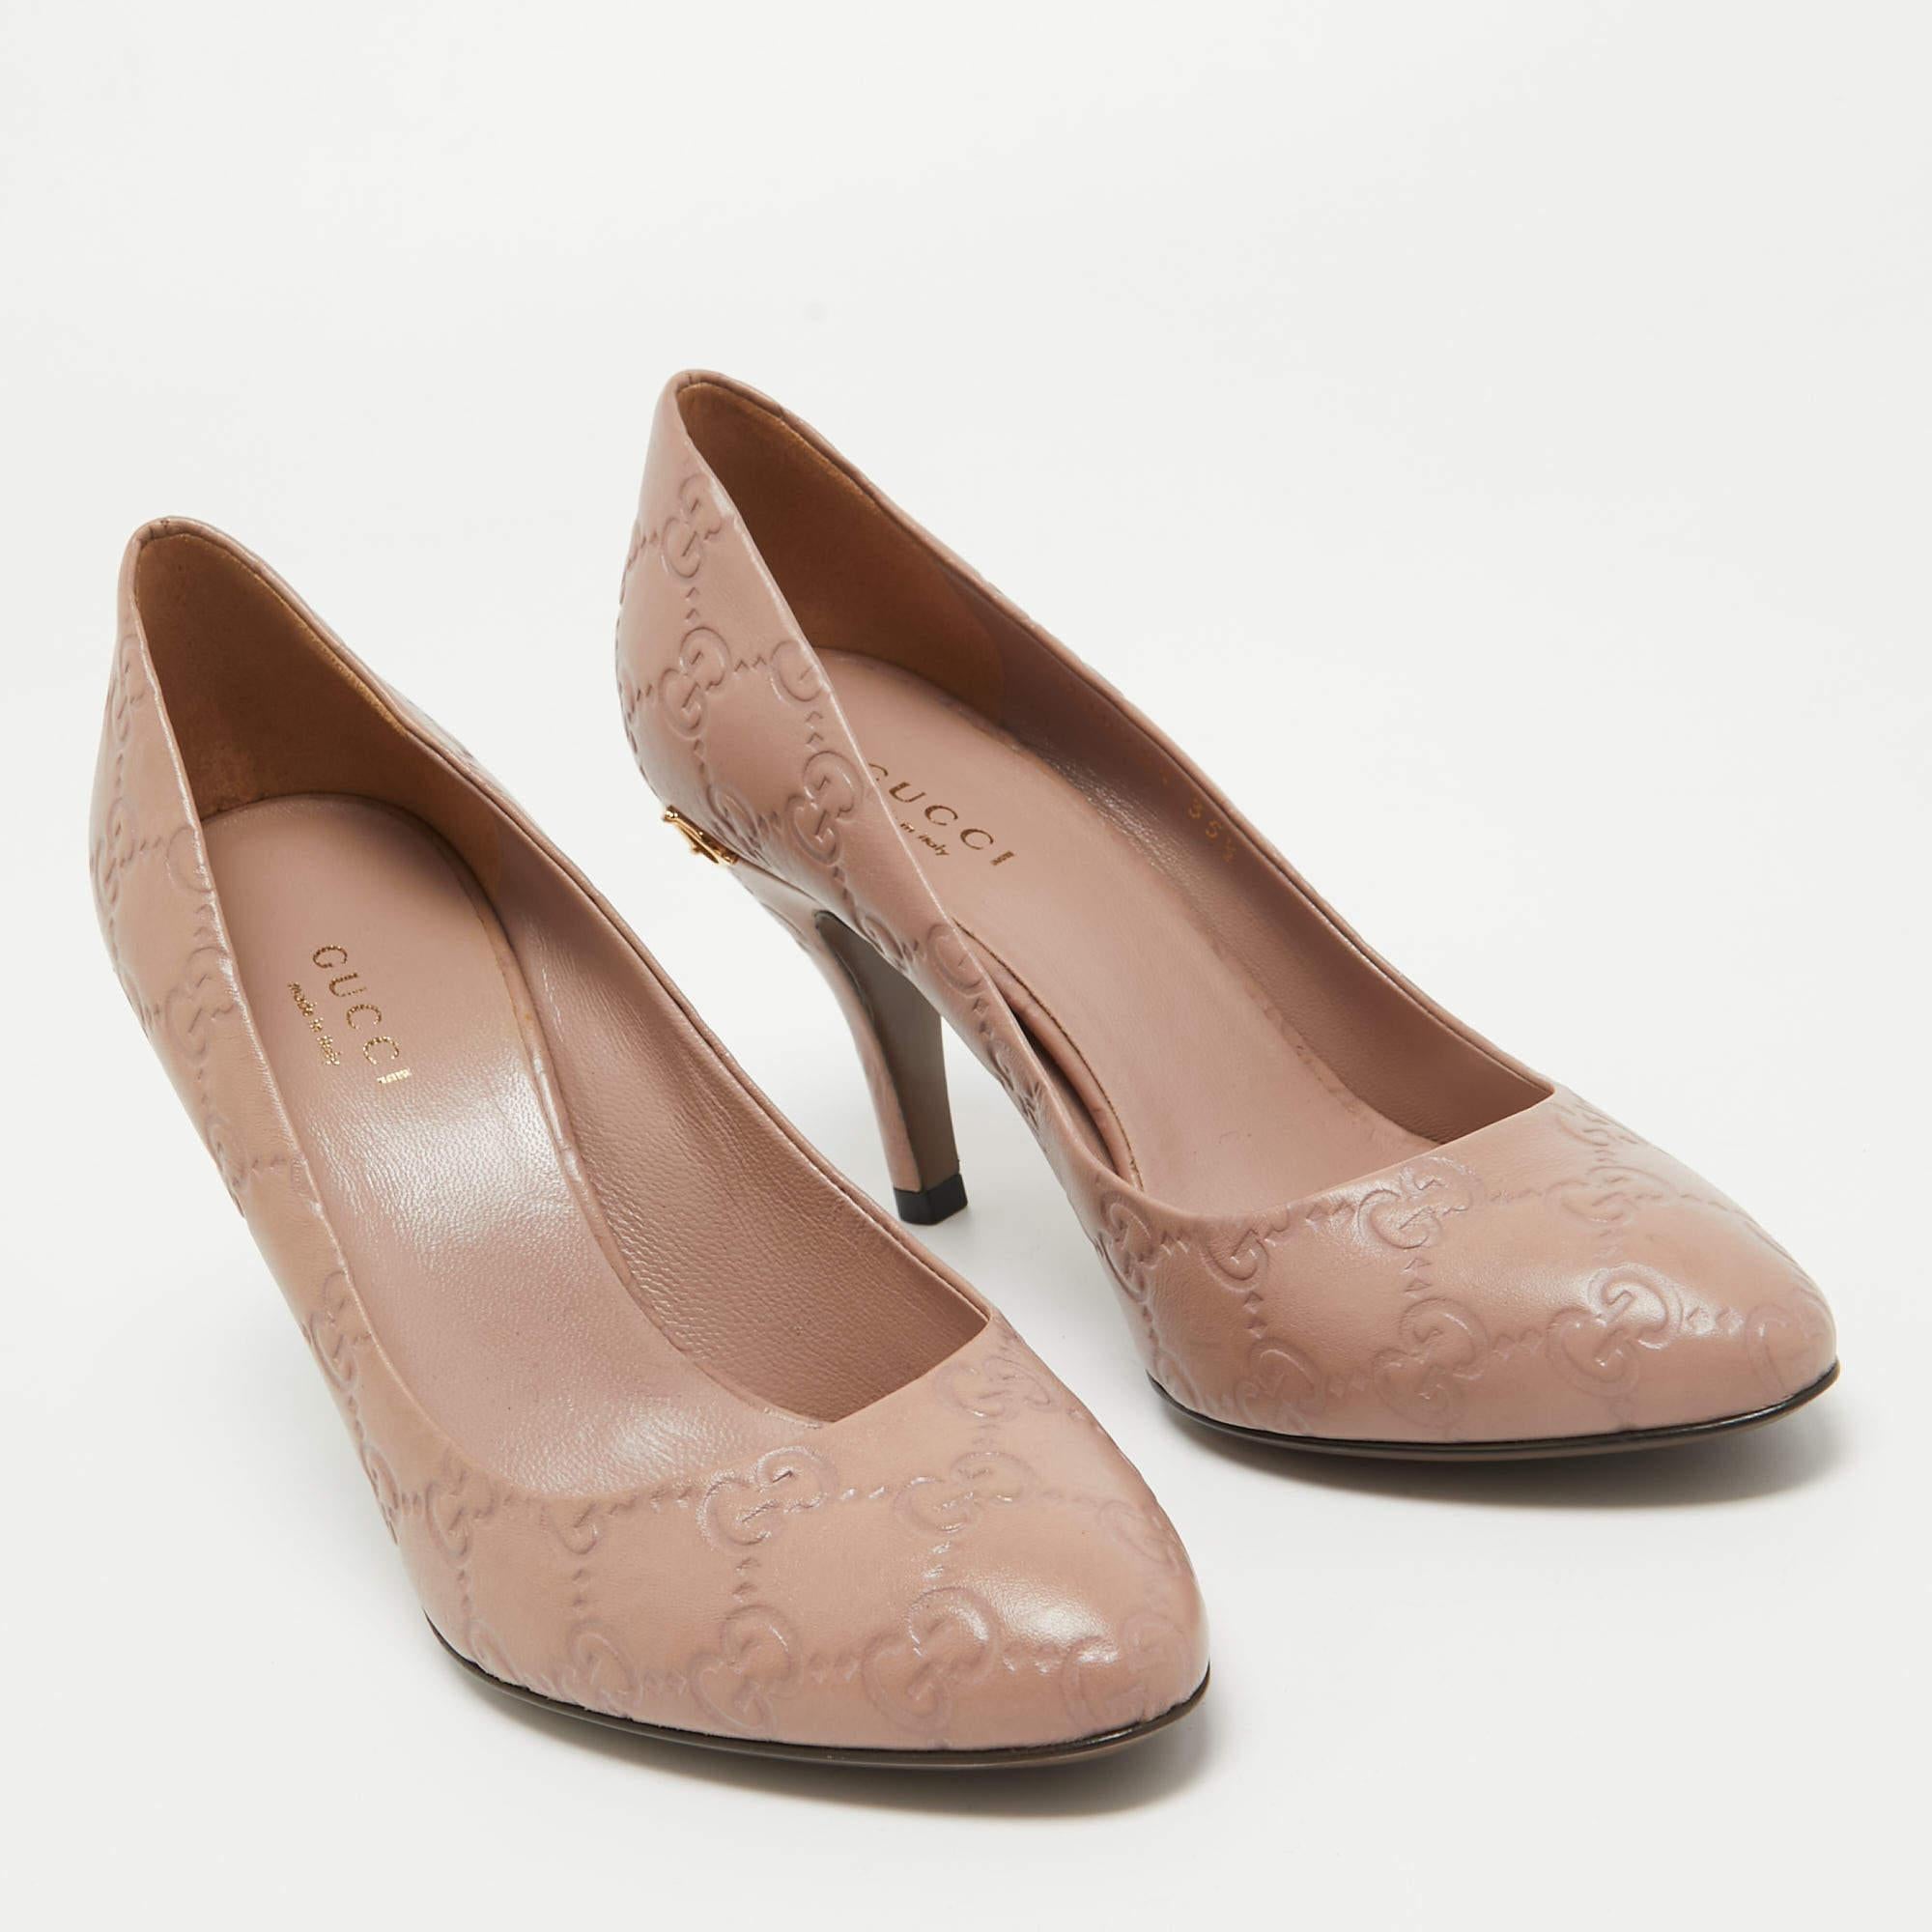 Gucci Pink Leather Guccissima Pumps Size 35.5 For Sale 1